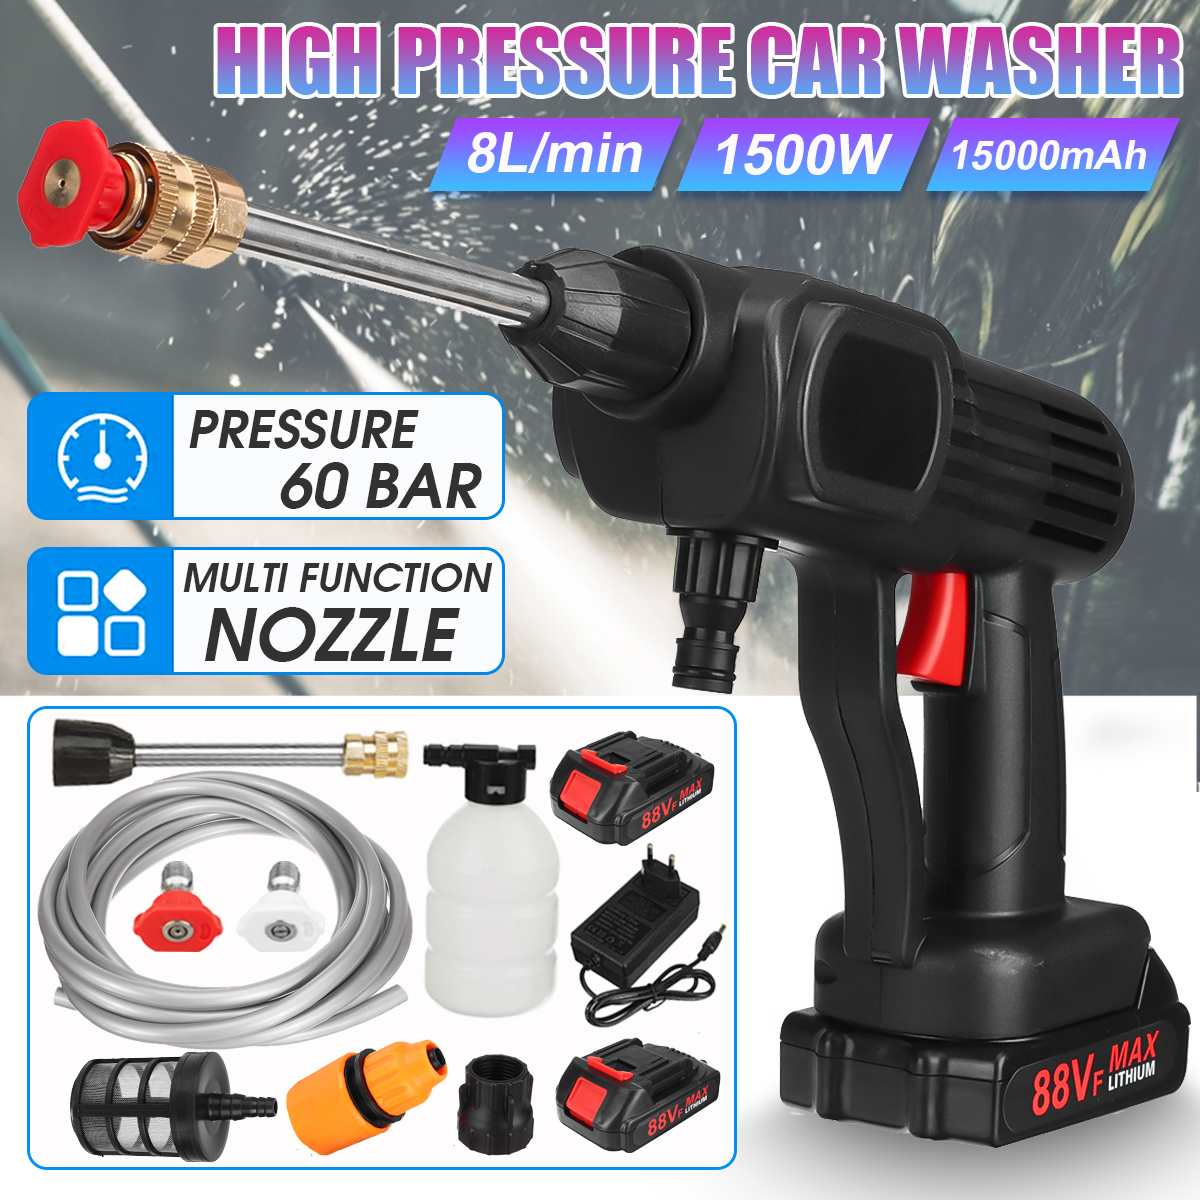 1500W-60Bar-High-Pressure-Cordless-Car-Washer-Spray-Guns-Water-Cleaner-With-None-1pc-2Pcs-88VF-Batte-1909356-1